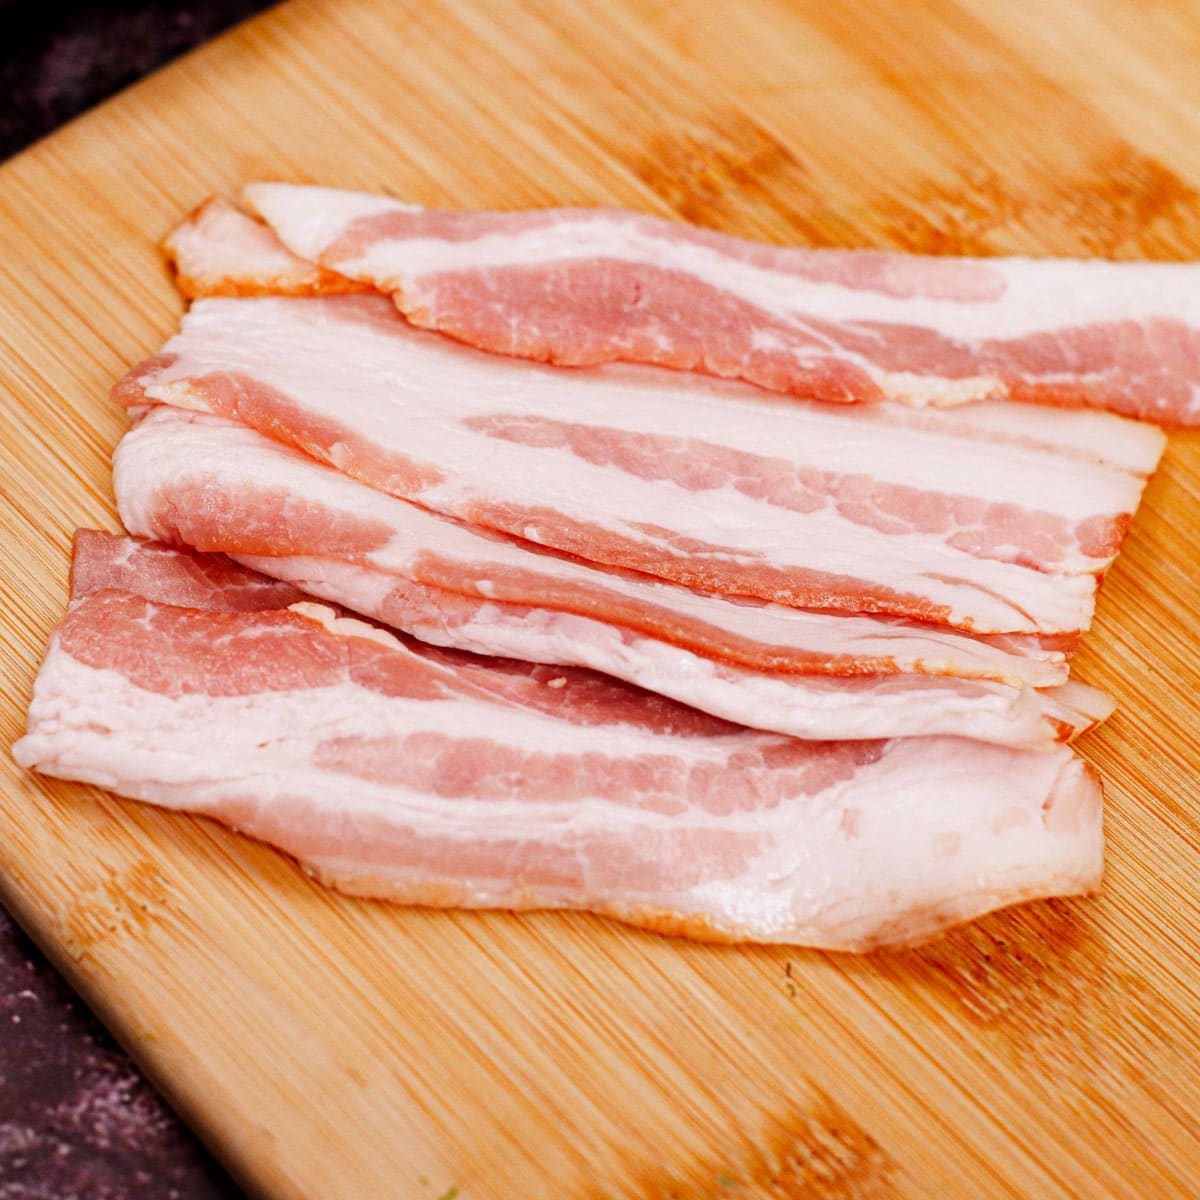 Halved bacon slices